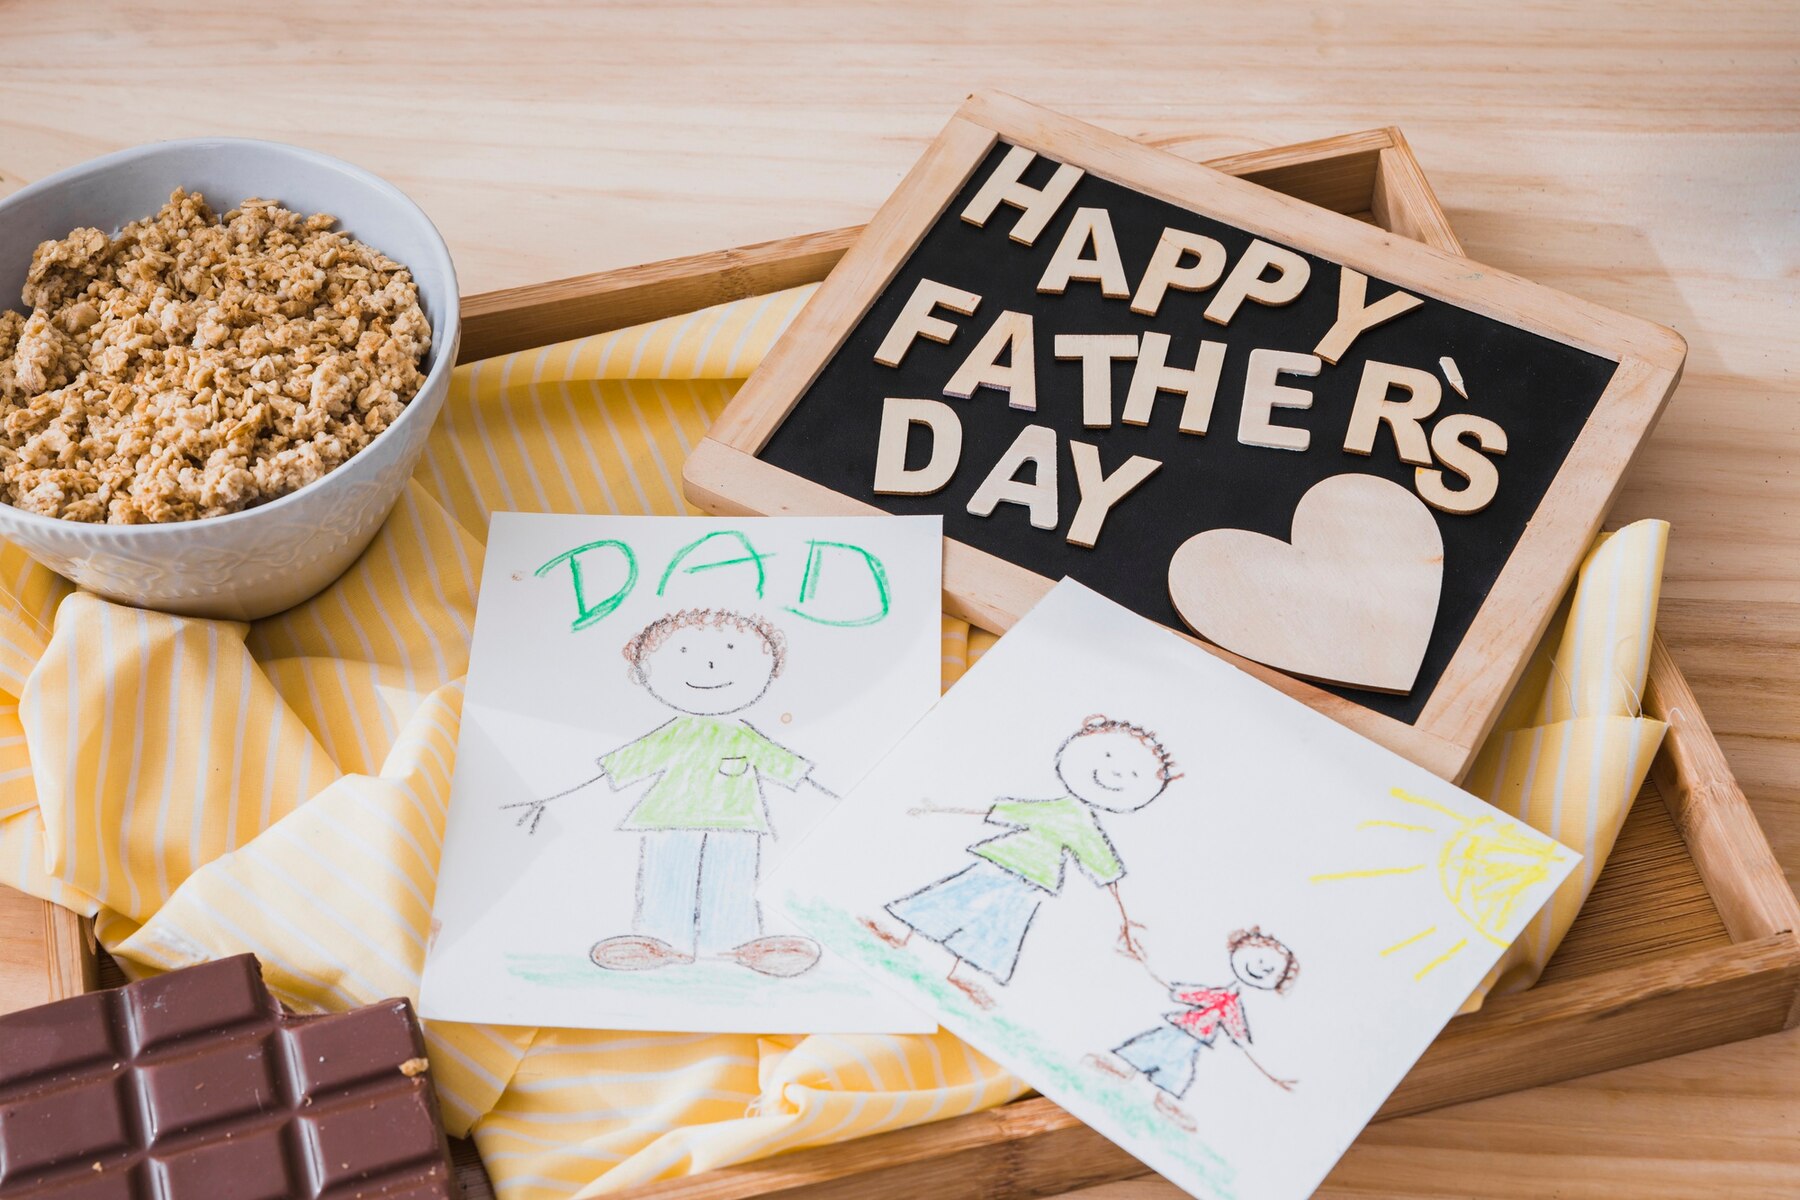 Wishes To Say When Presenting DIY Gifts For Father’s Day